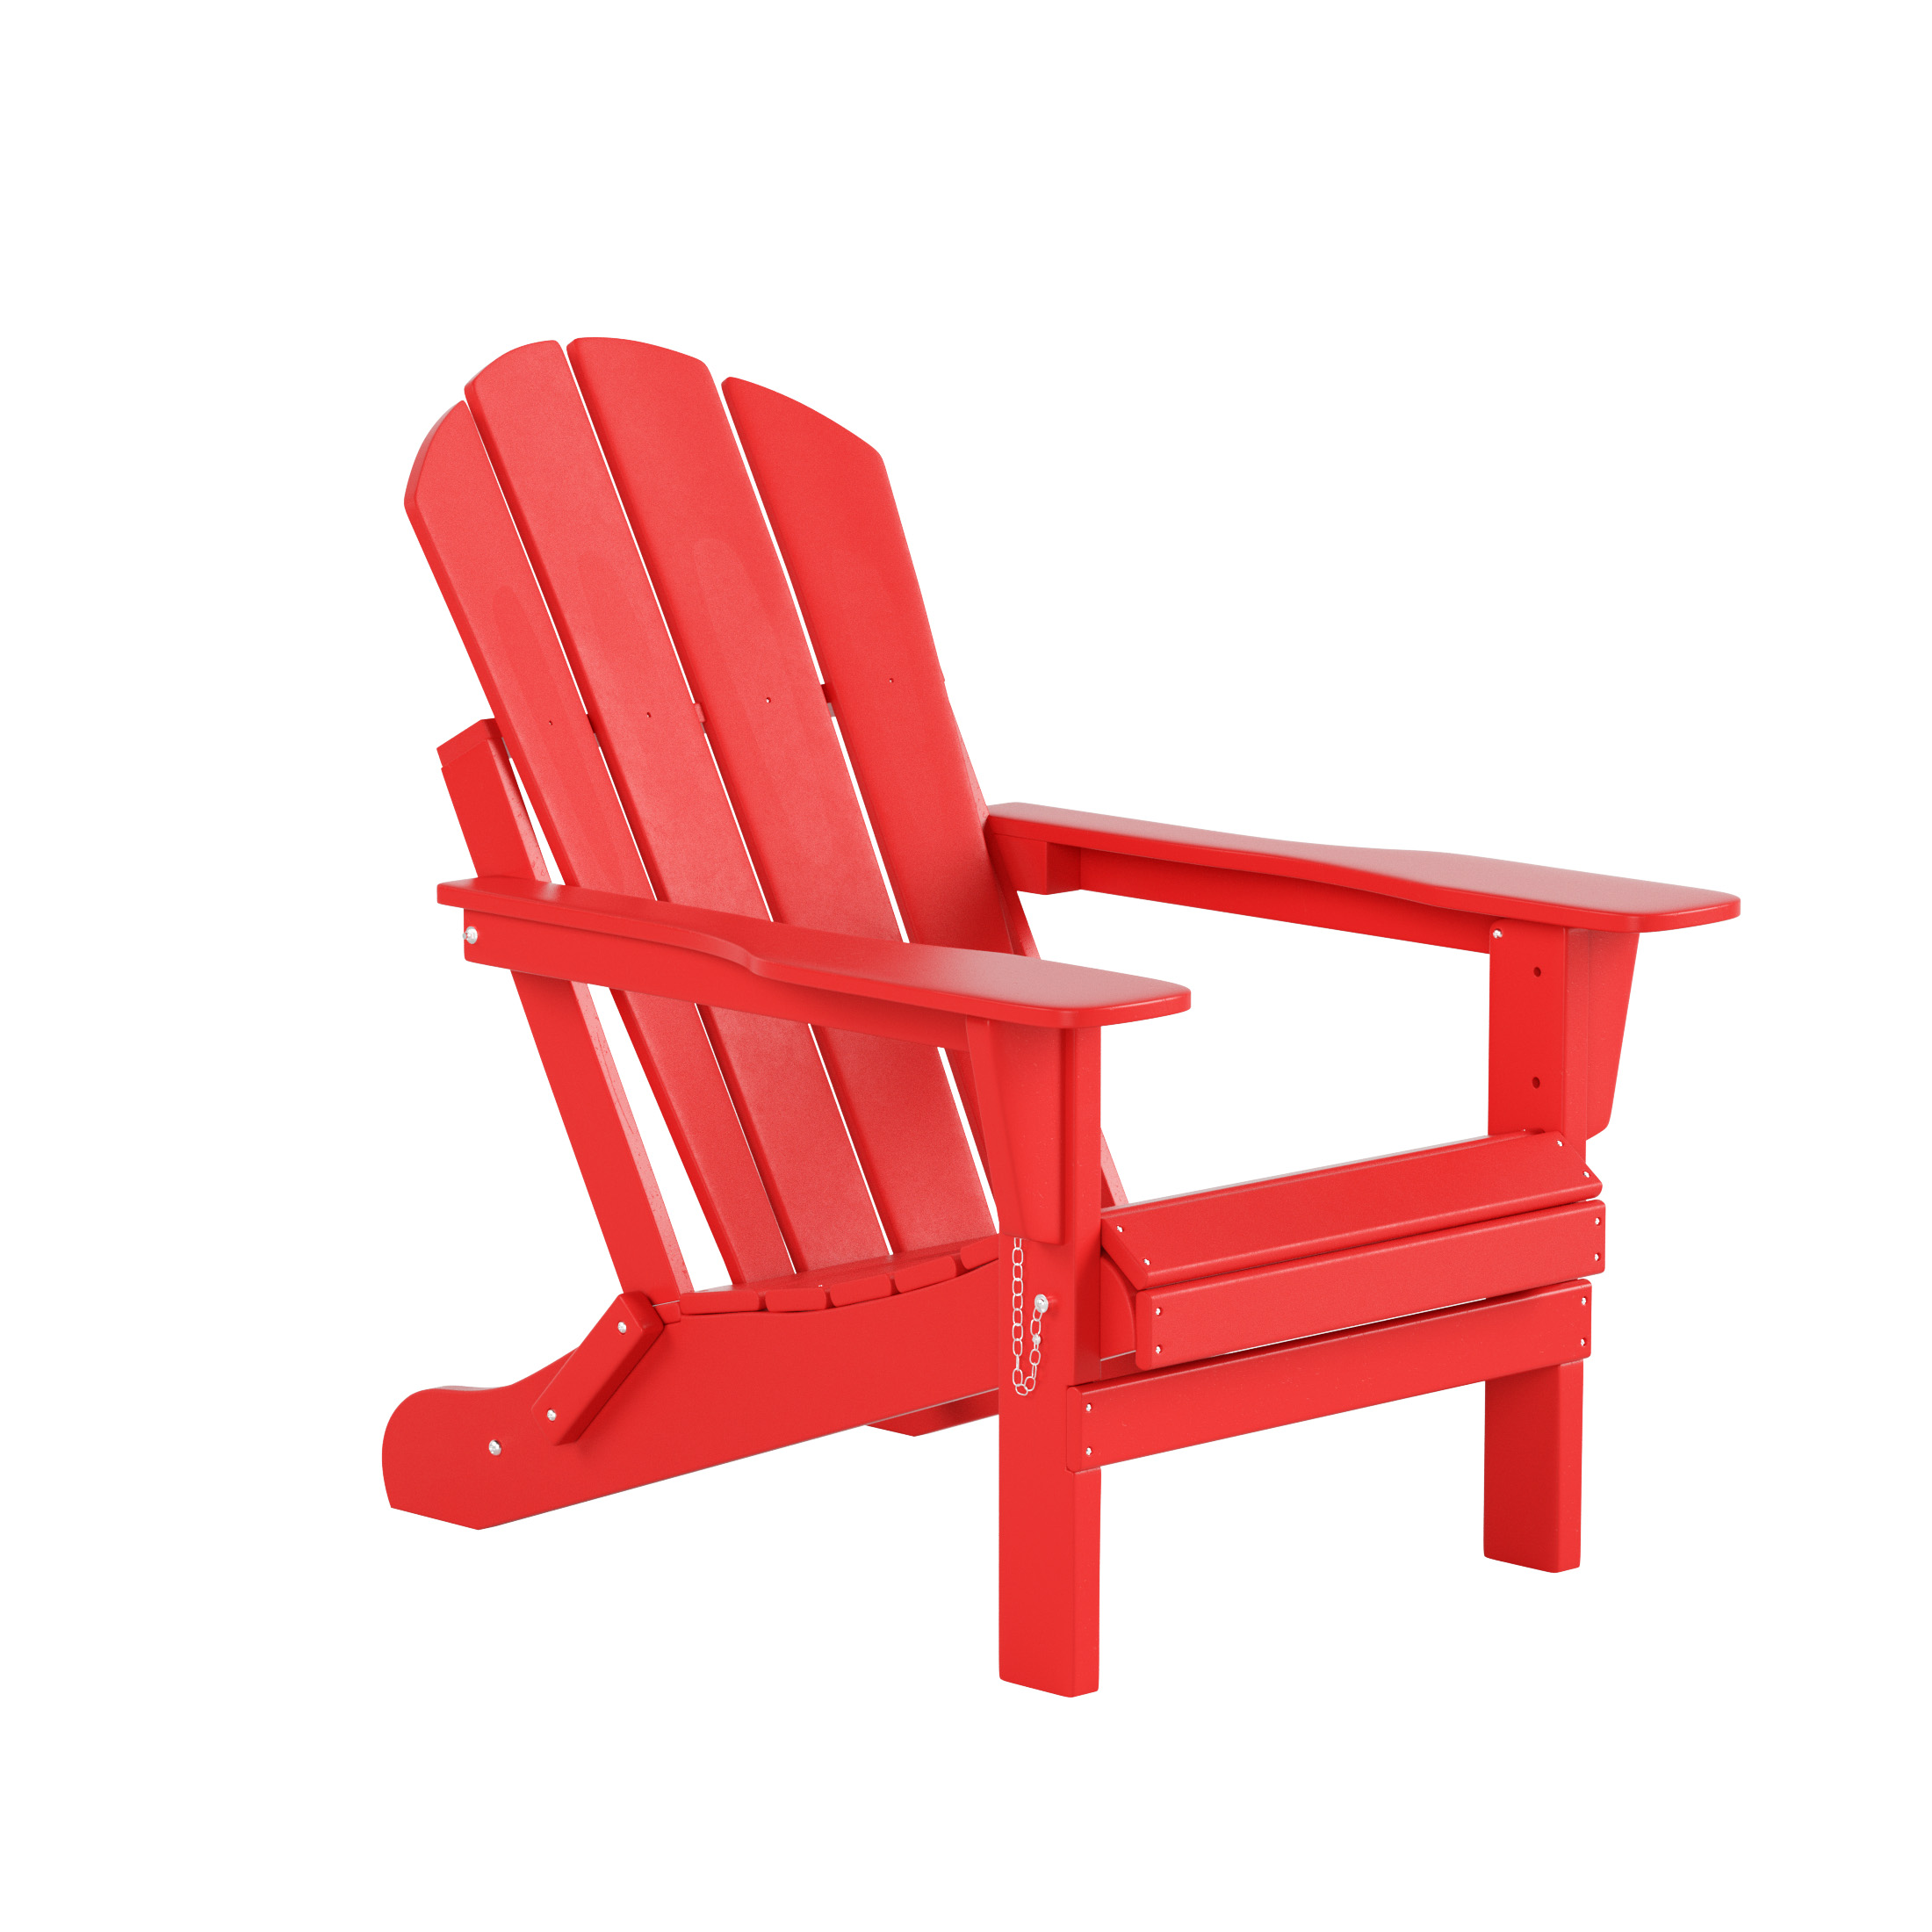 WestinTrends Malibu 7-Pieces Outdoor Patio Furniture Set, All Weather Outdoor Seating Plastic Adirondack Chair Set of 4, Coffee Table and 2 Side Table, Red - image 3 of 7